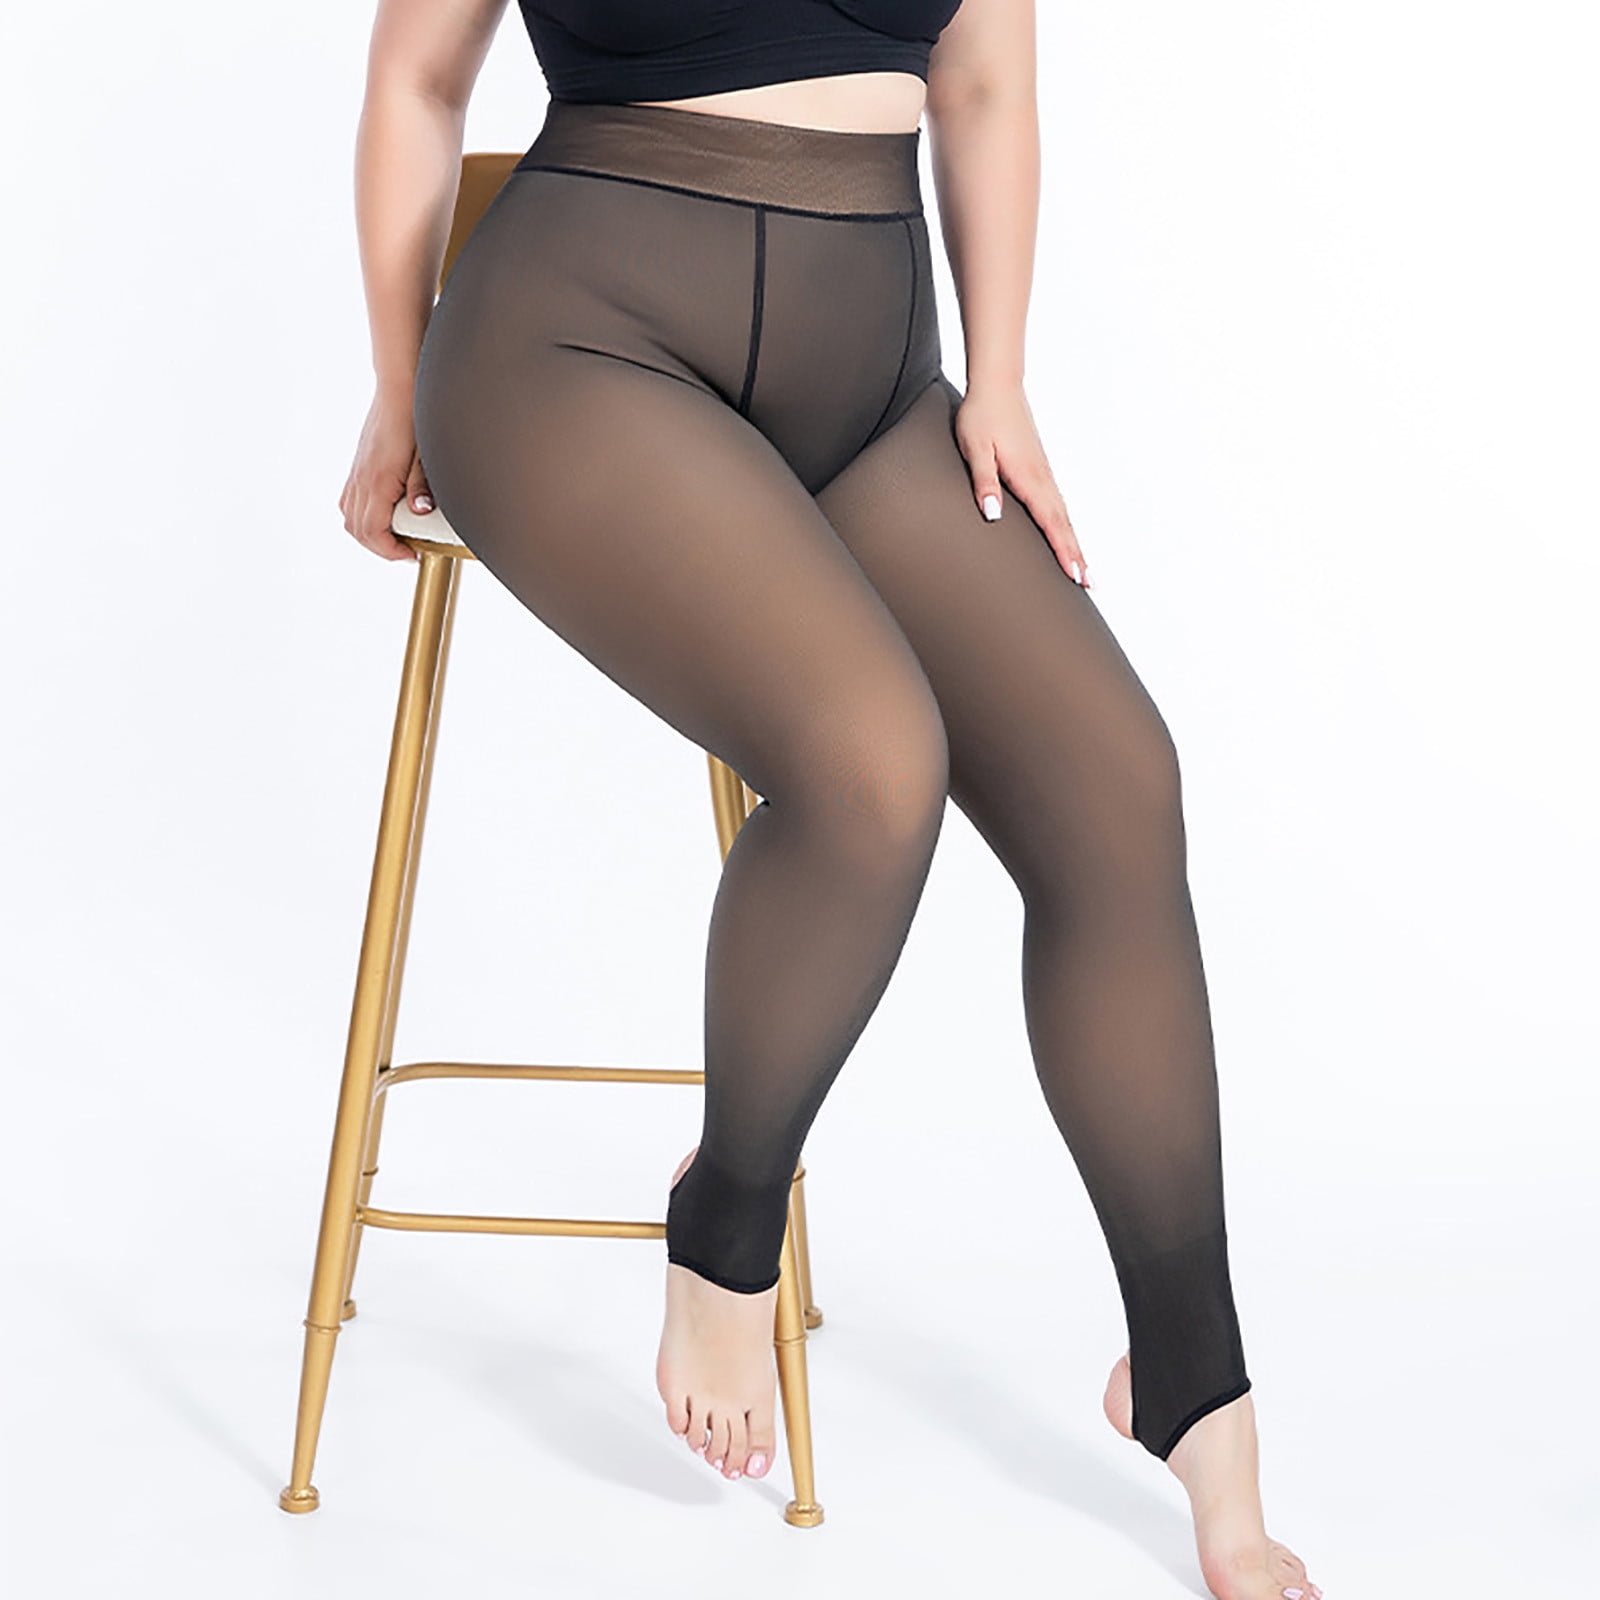 Dndkilg Plus Size Maternity Leggings Skin Color Sheer Skin Tone Warm Tights  for Women Plus Size High Waisted Tall Thermal Pantyhose Green M